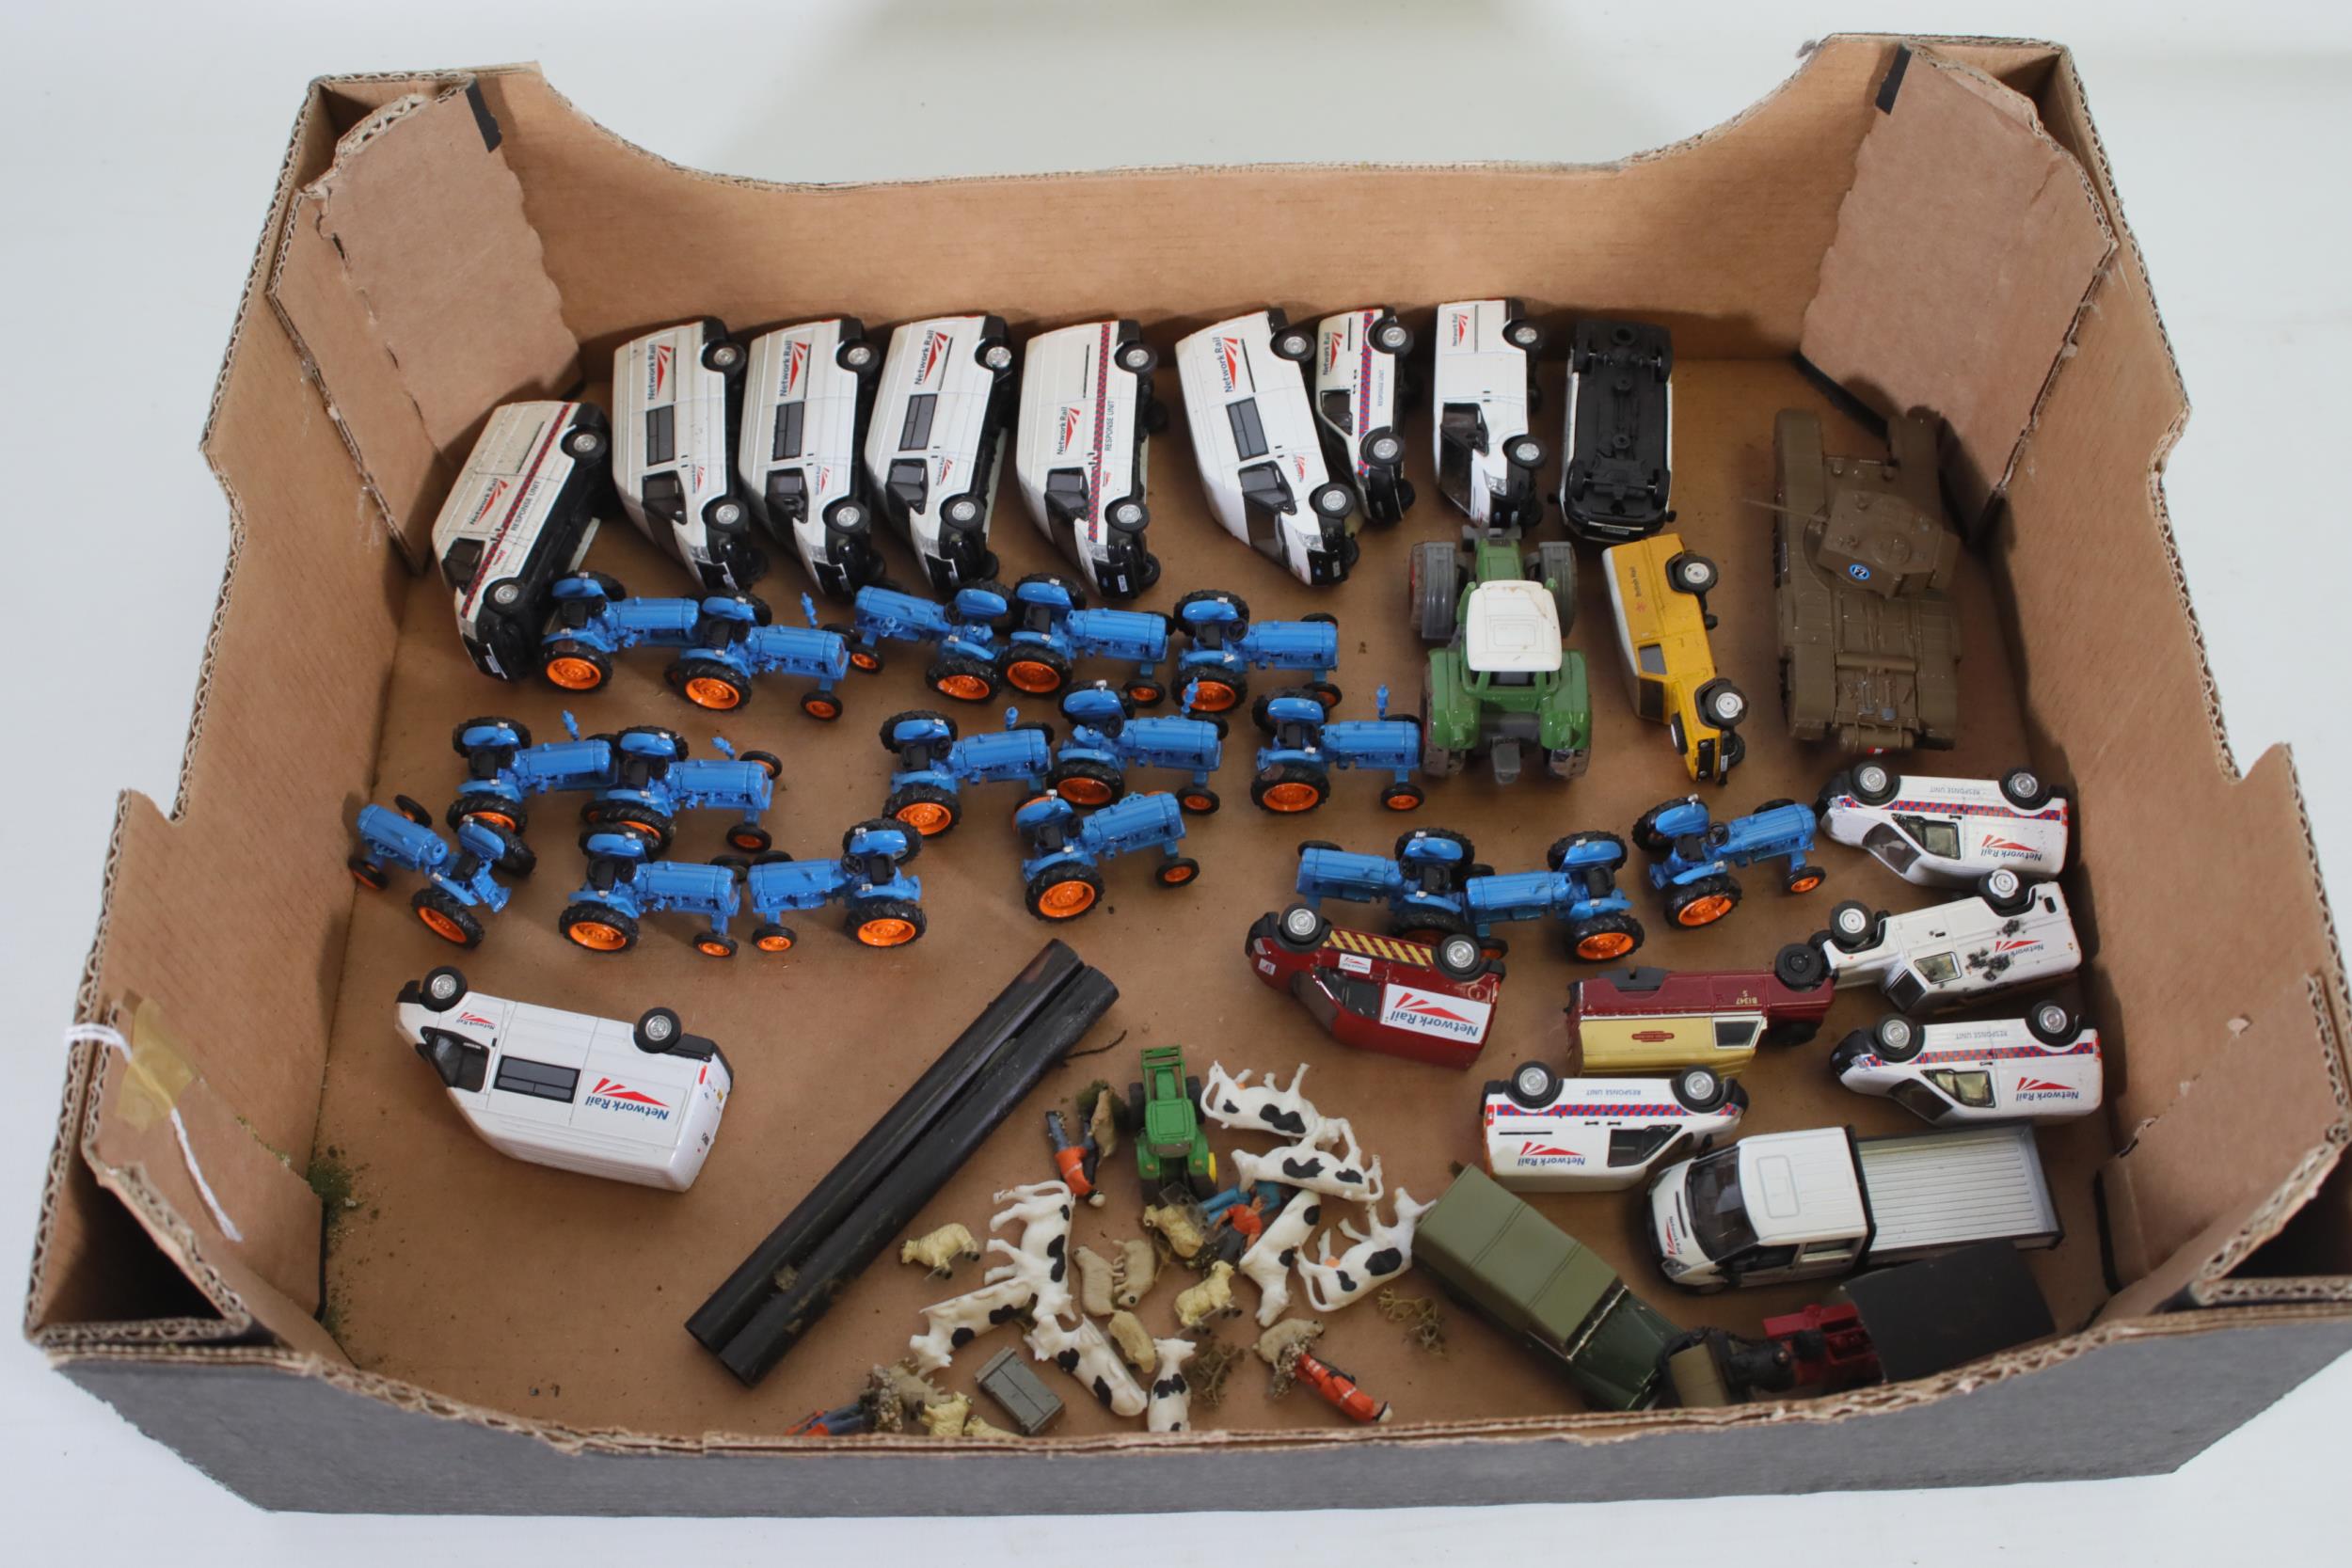 Train Enthusiast Layout Decorations and Transportation Vehicles - Image 3 of 8